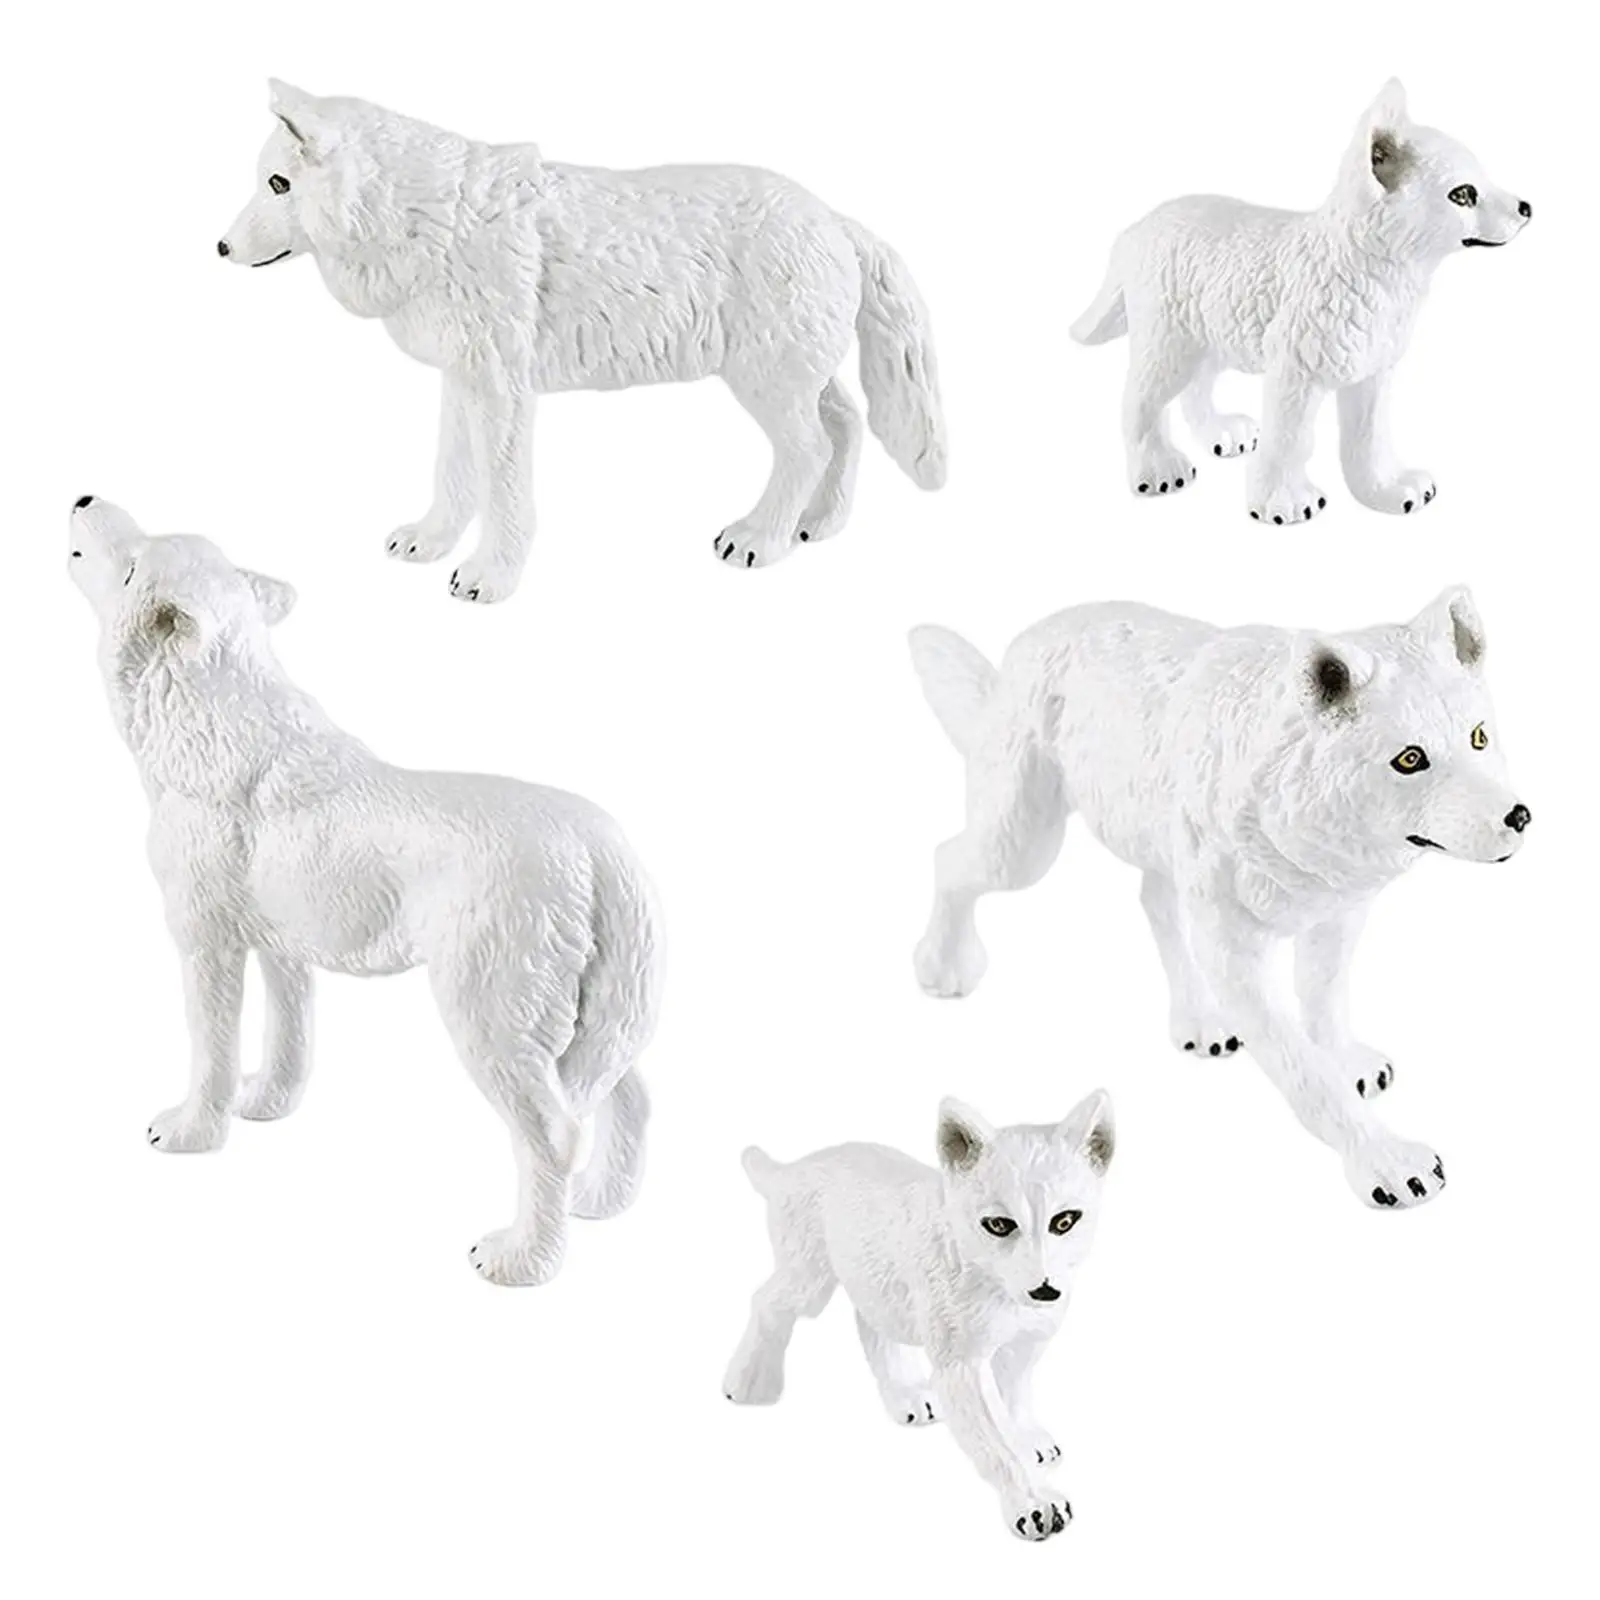 

5x Wolf Toys Figures Preschool Creatures Learning Cognitive Toy Miniature Wolves Gift Animal Toys Boys and Girls Ages 3 and up